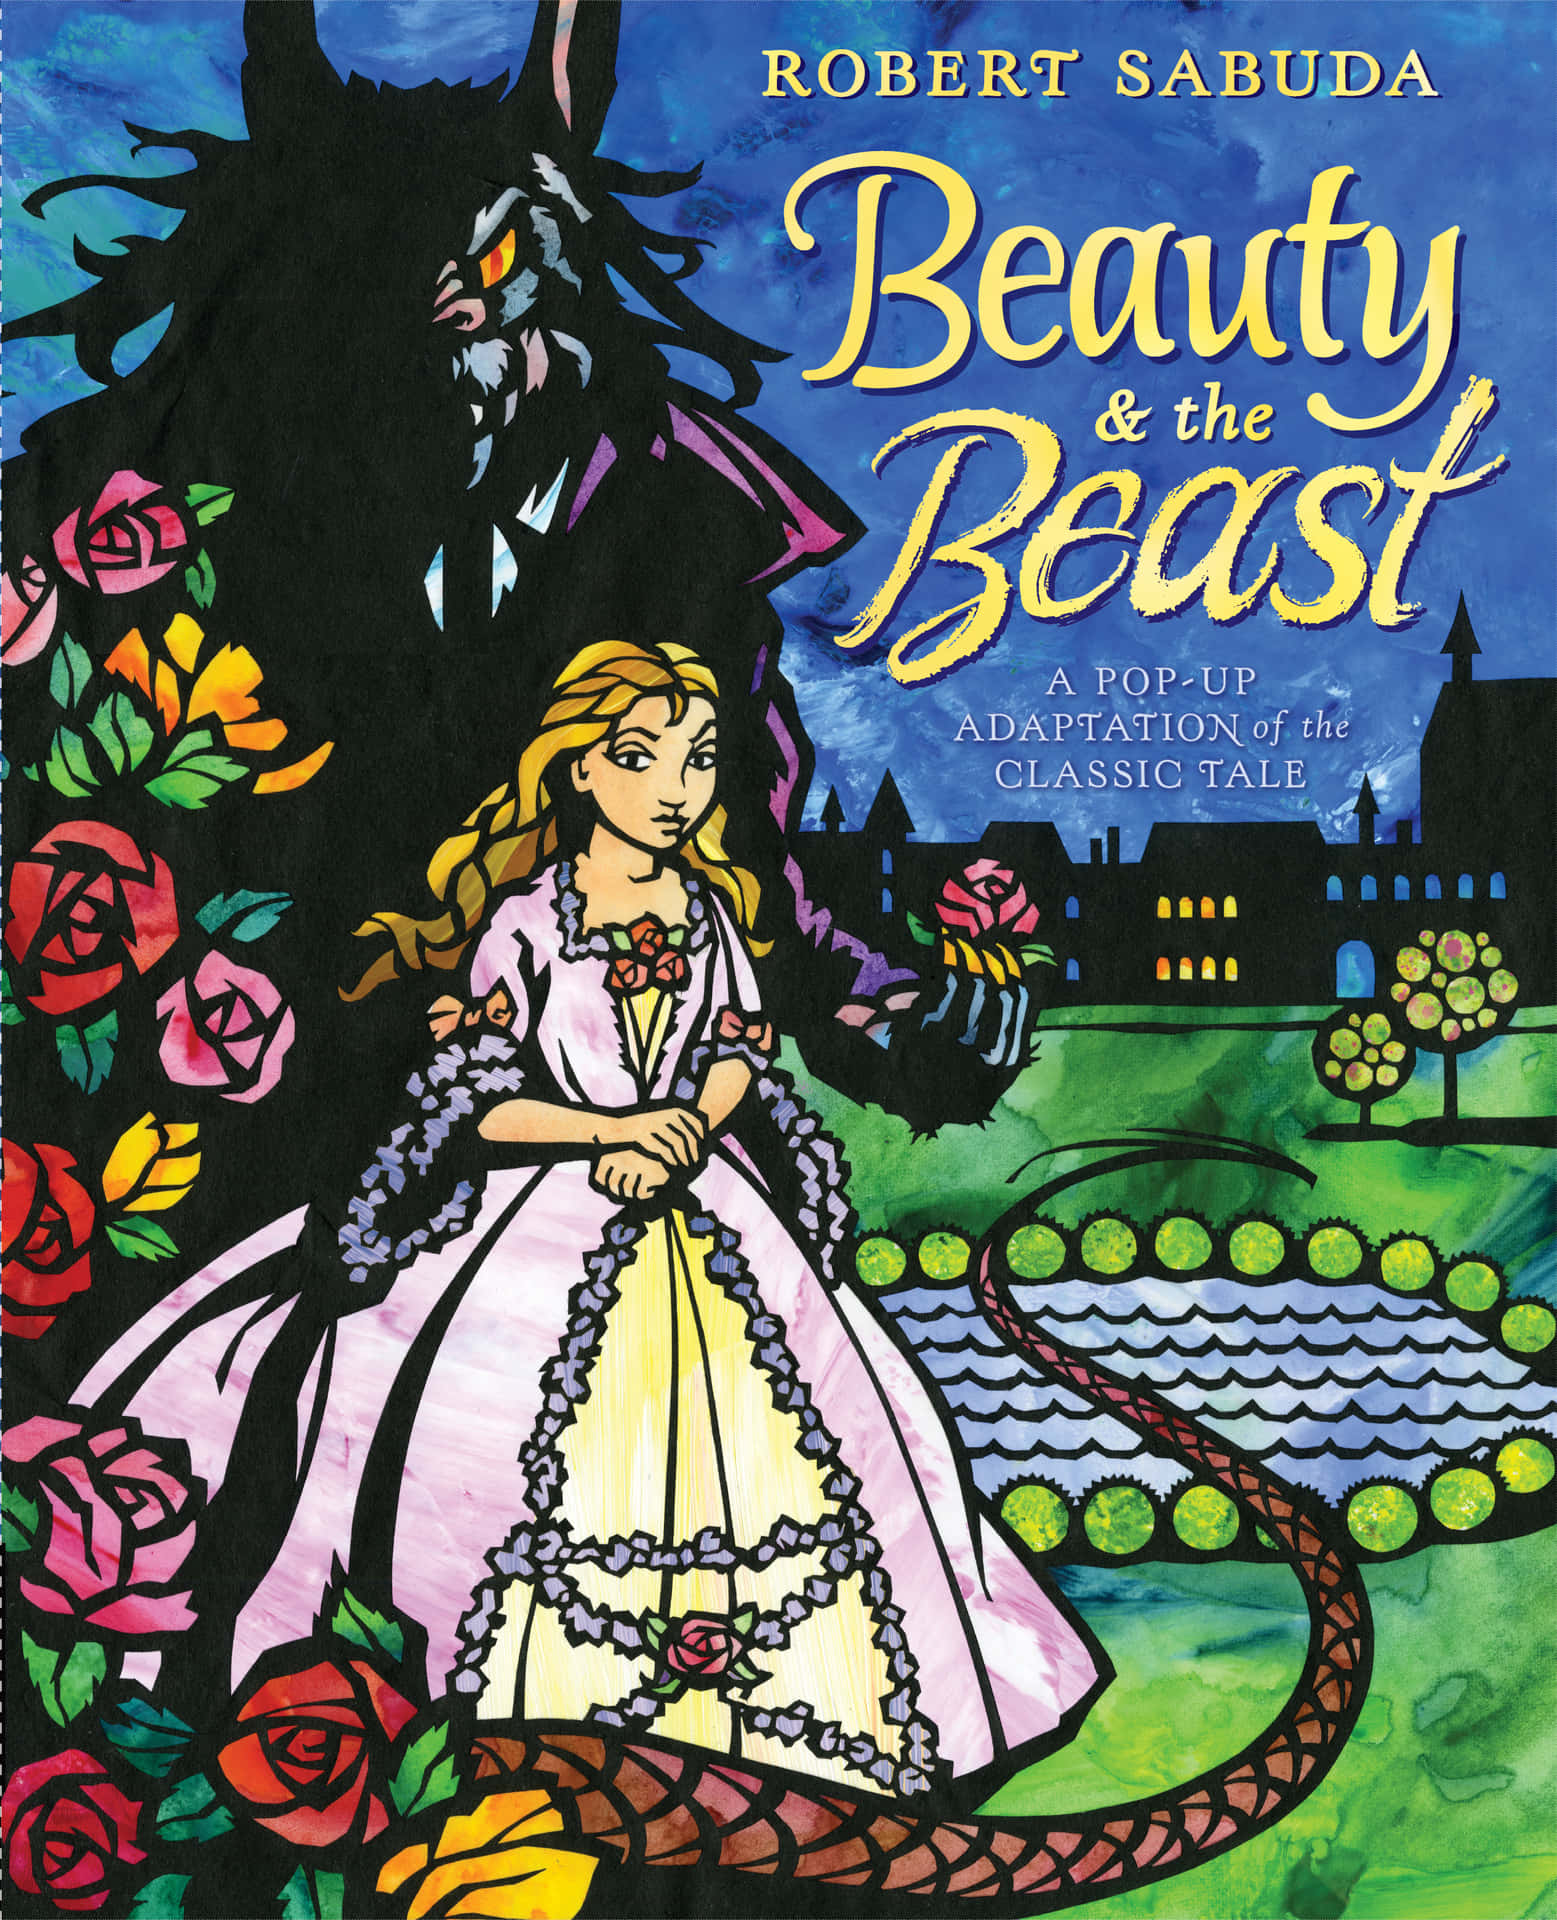 Beauty and the Beast's magic enchanted castle